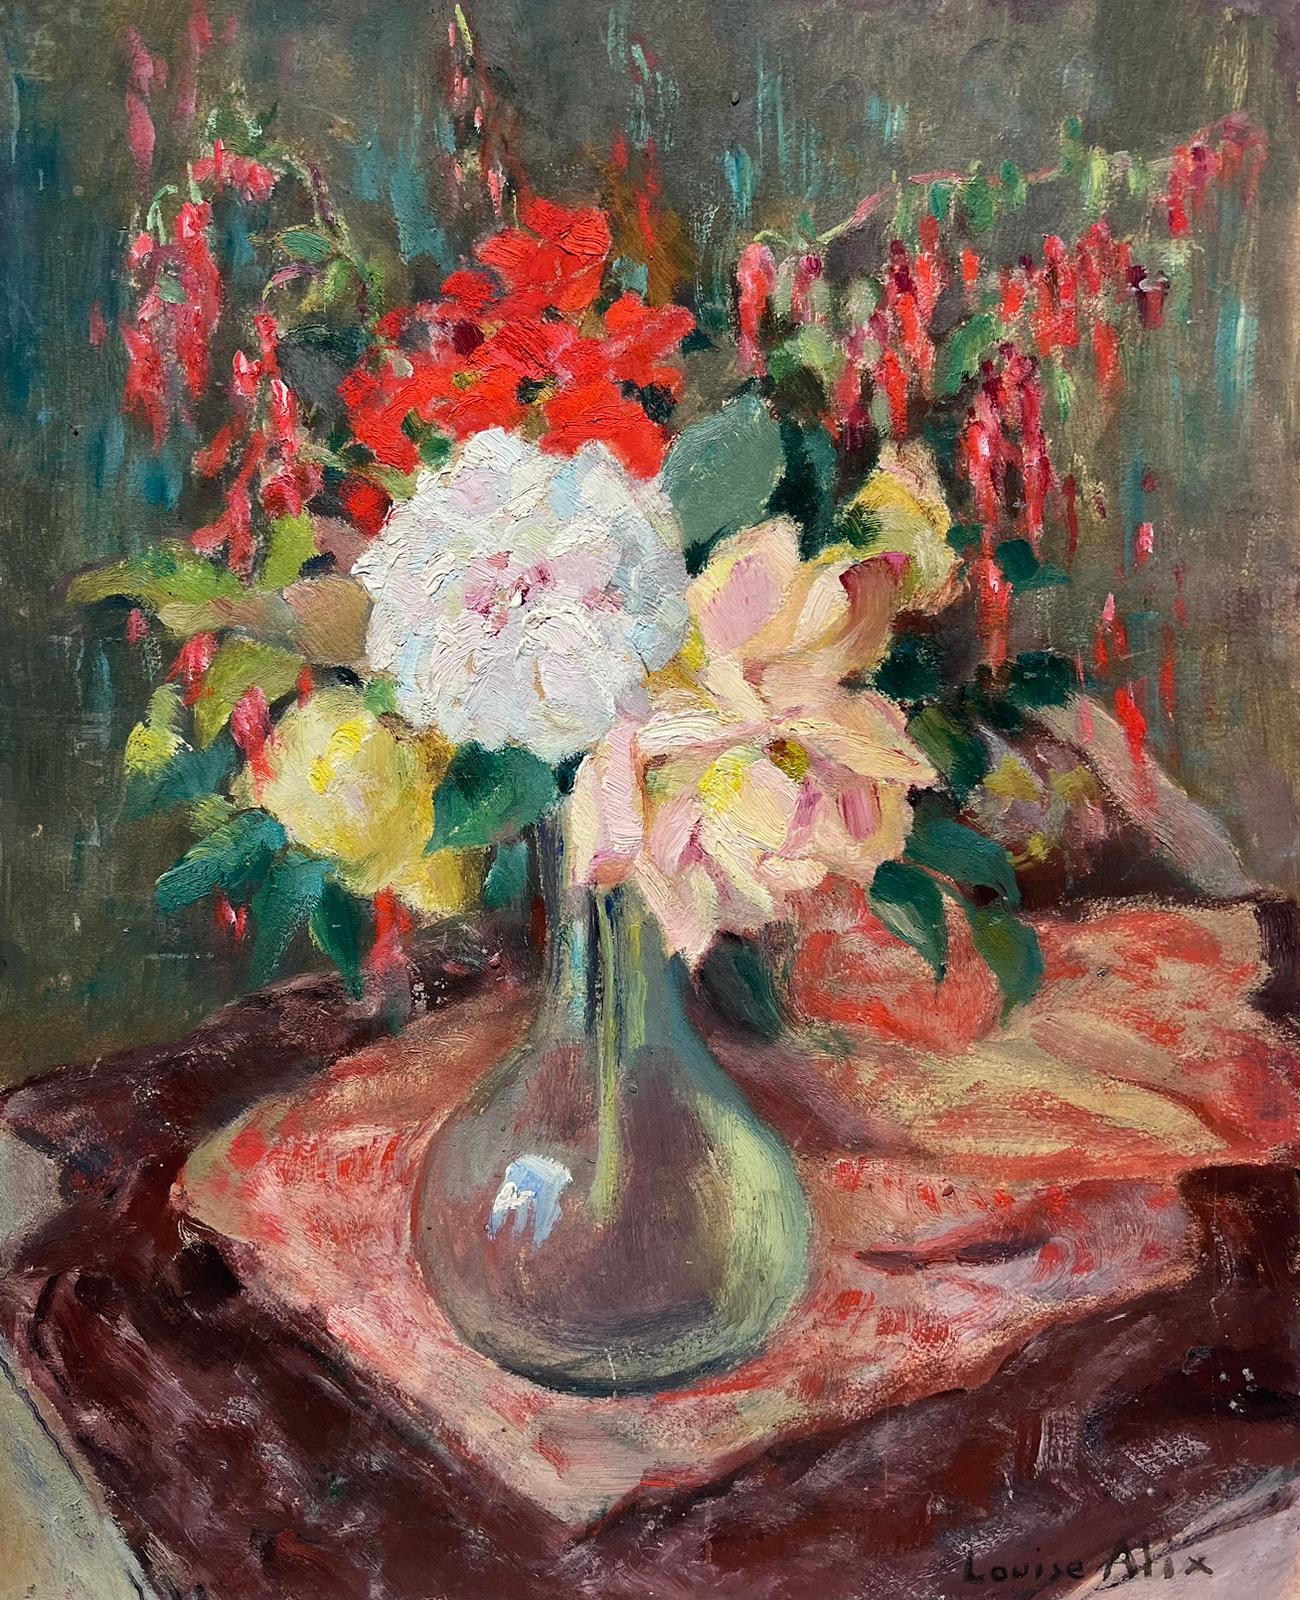 Roses in Interior
by Louise Alix (French, 1888-1980) *see notes below
provenance stamp to the back 
signed oil painting on canvas stuck on board, unframed
measures: 16.5 high by 13 inches wide
condition: overall very good and sound, a few scuffs and